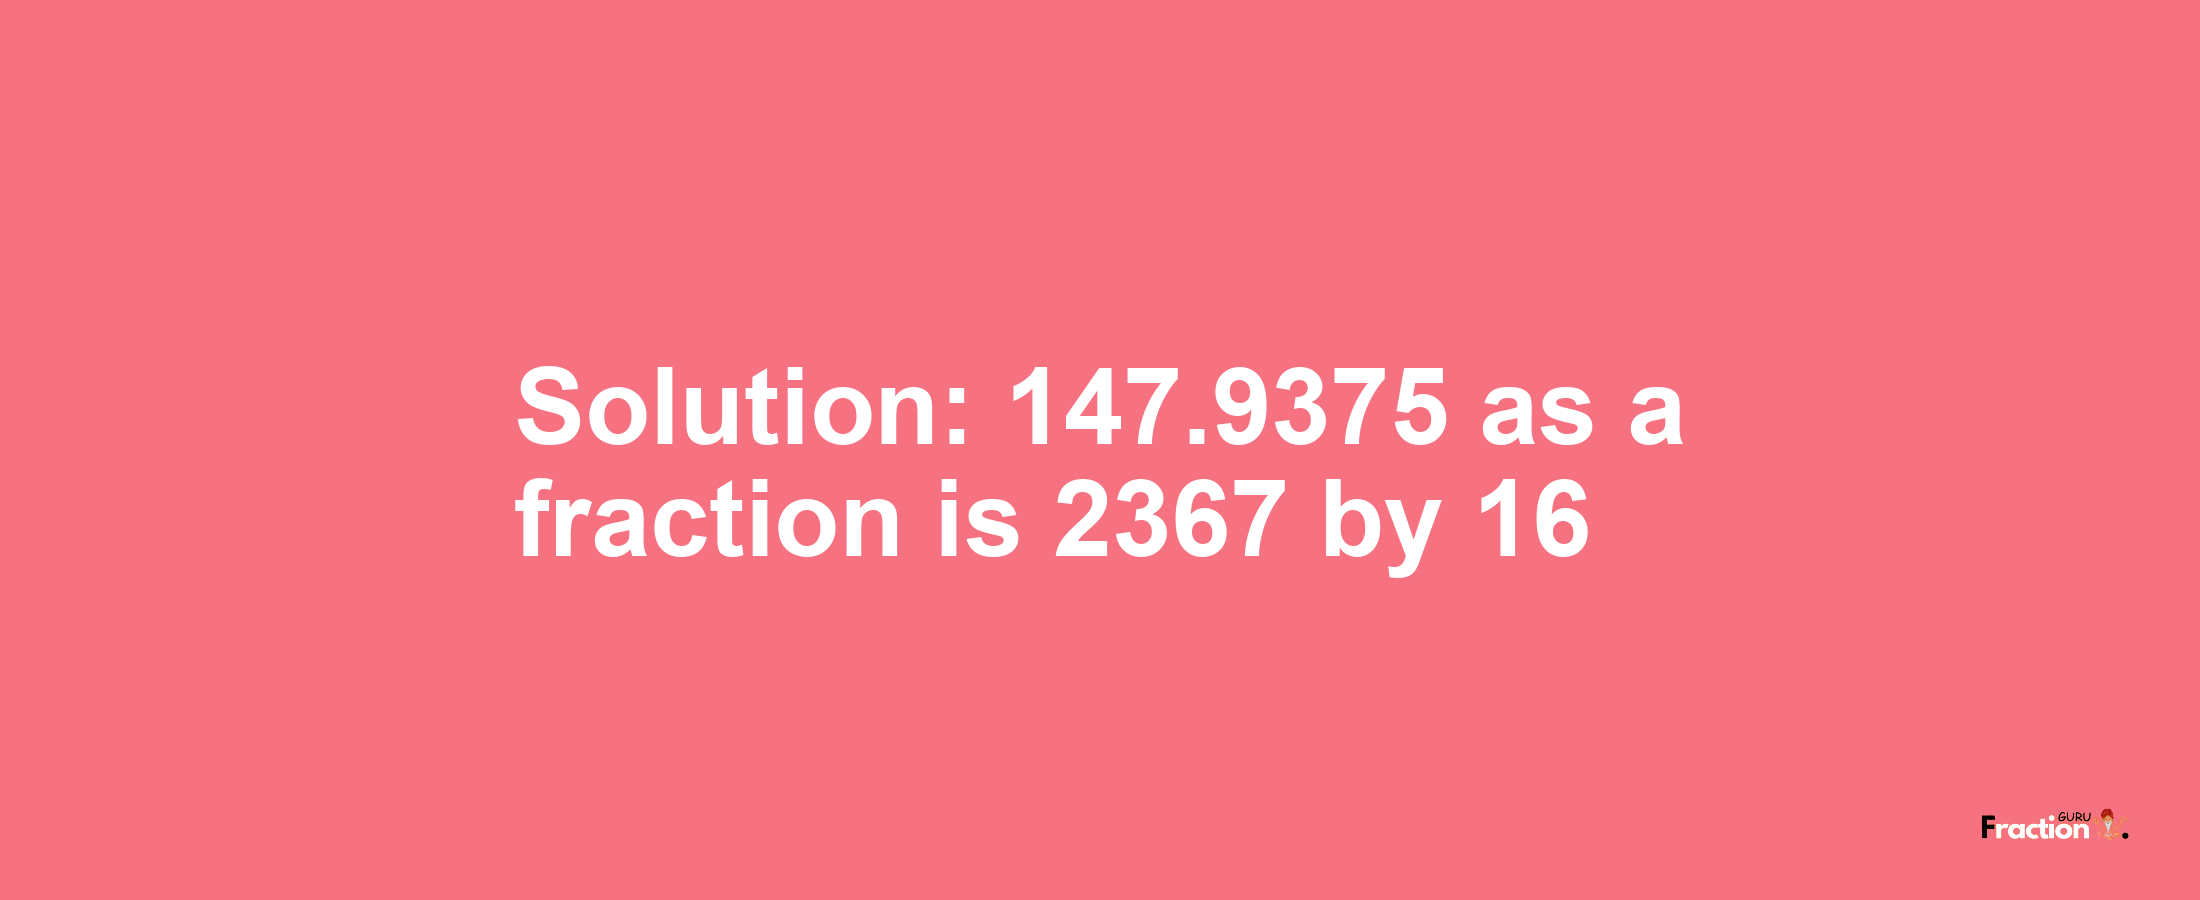 Solution:147.9375 as a fraction is 2367/16